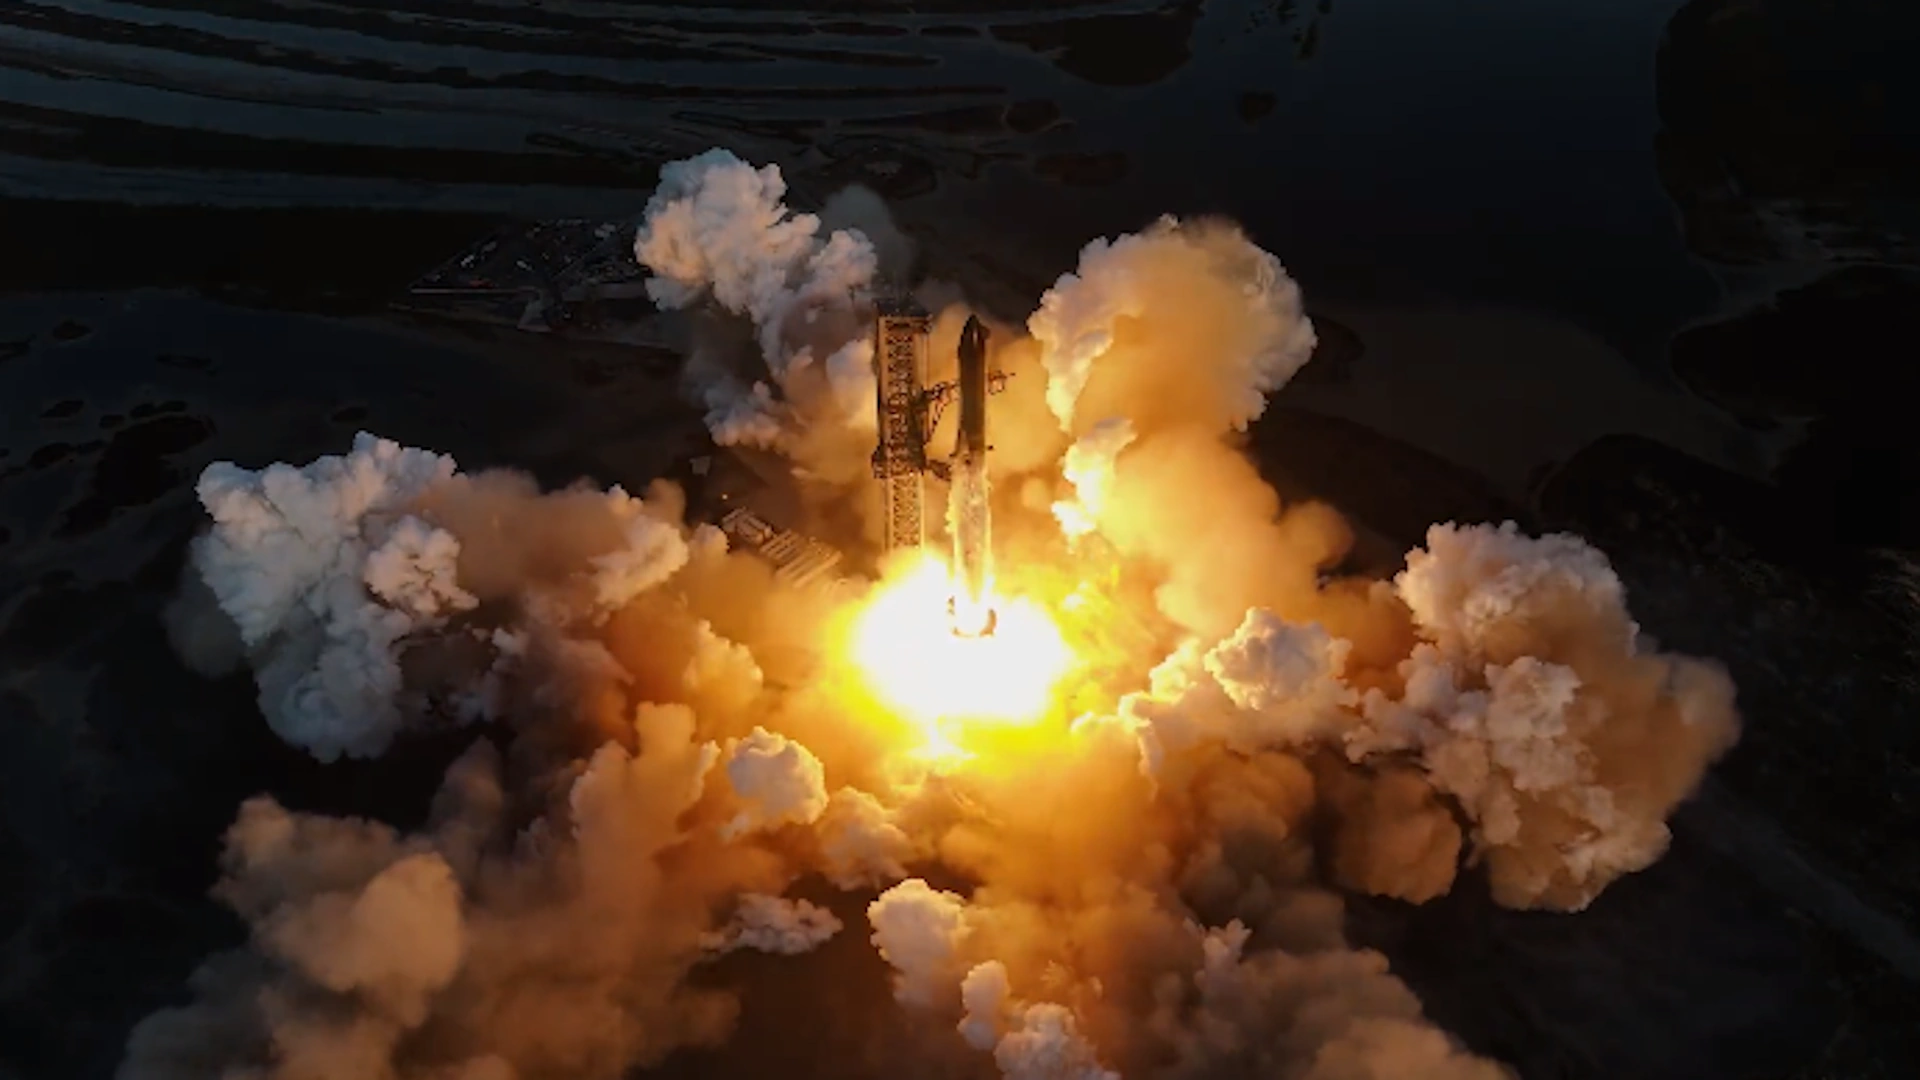 Another SpaceX test flight into space ended with the explosion of the Starship rocket